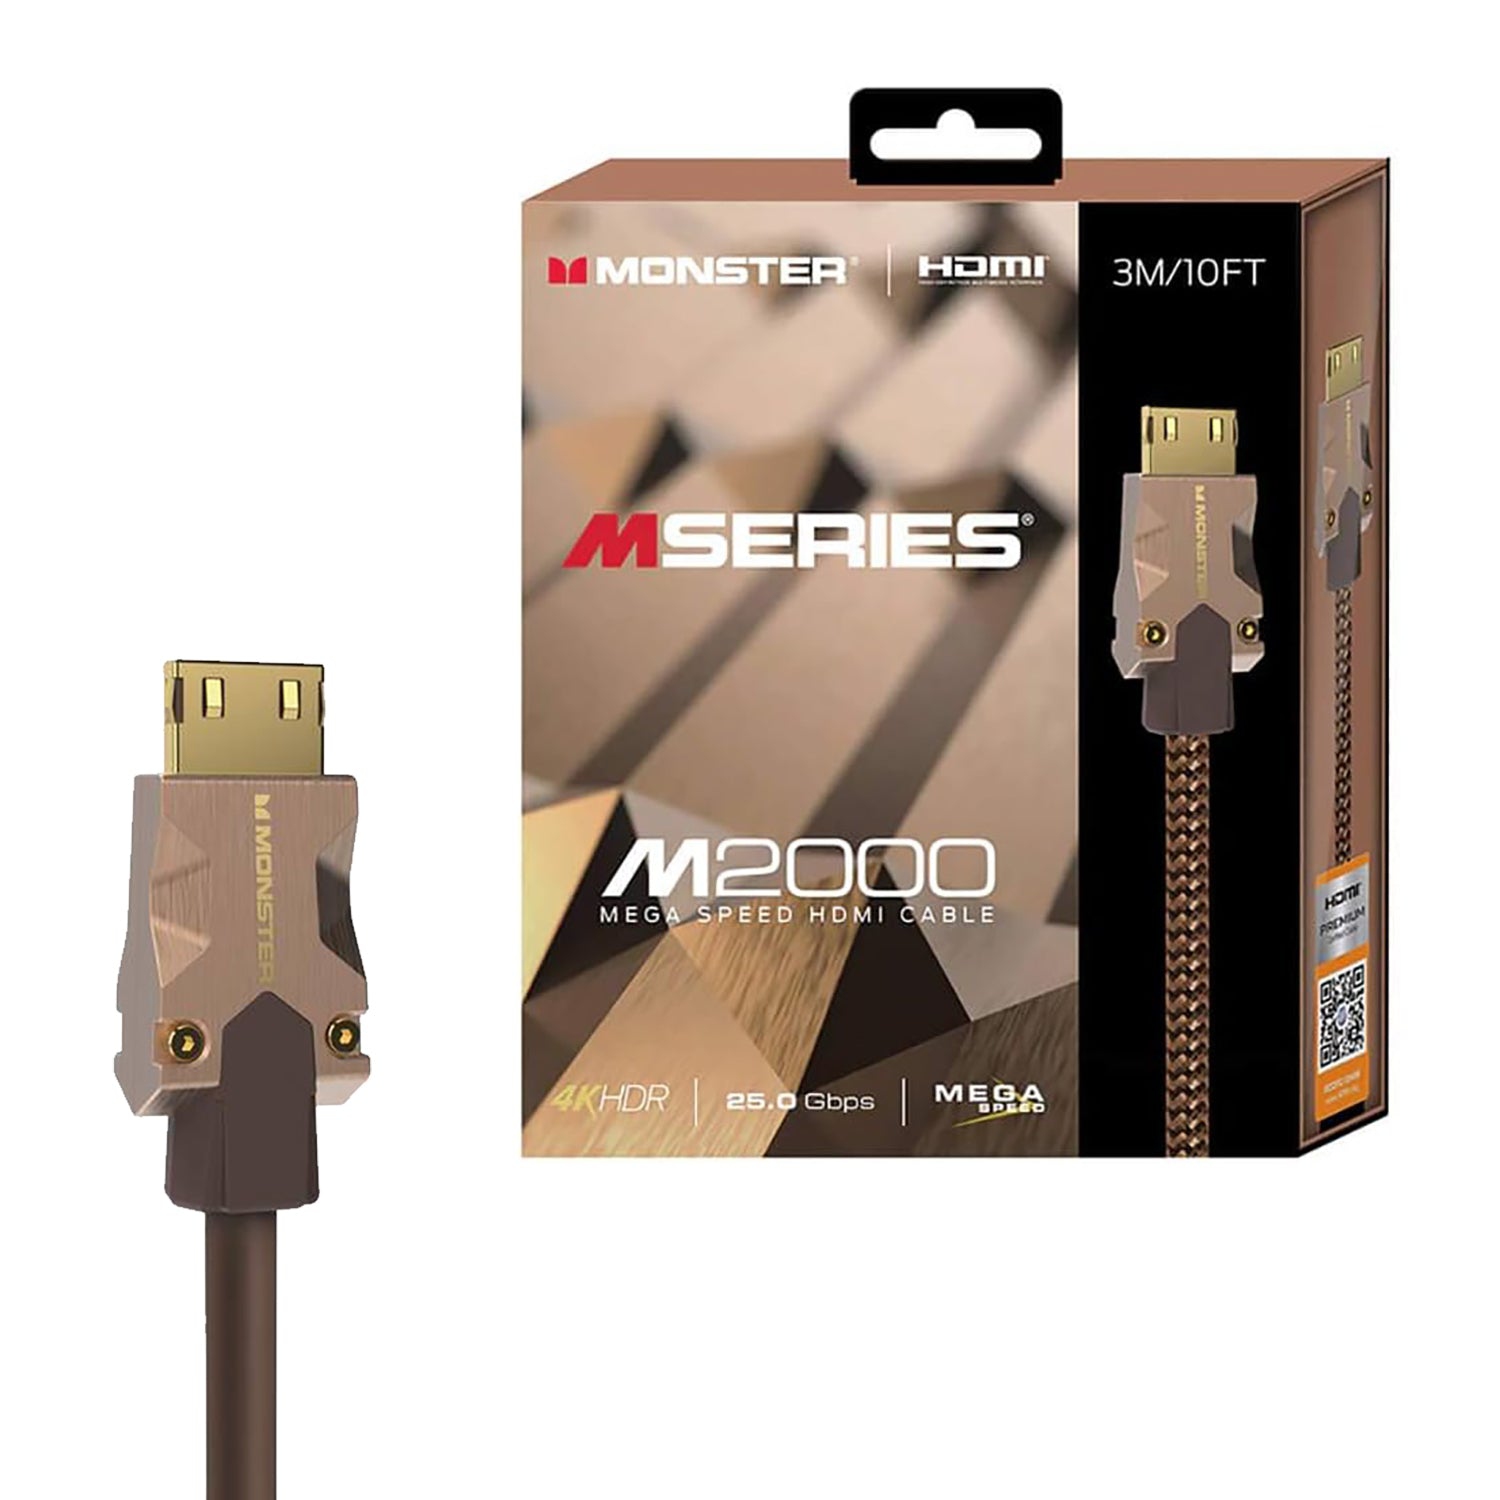 Monster - M Series M 2000 High Speed HDMI Cable, 25GBPS, 10 Feet Length